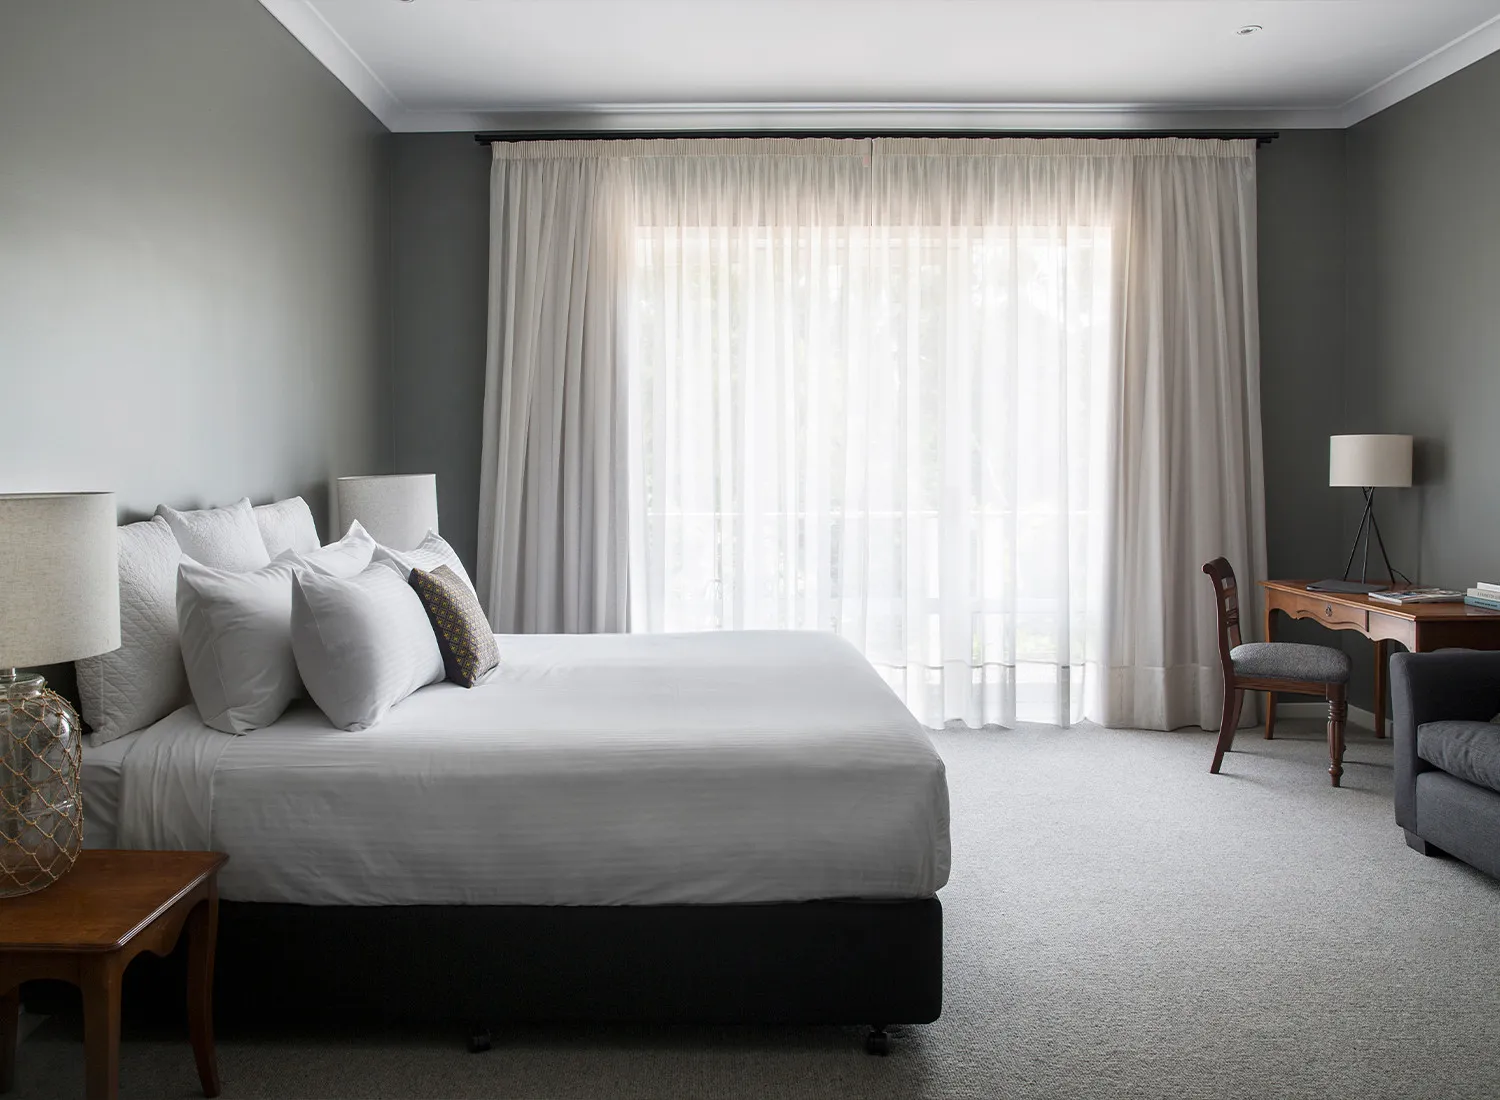 Lancemore Lindenderry Red Hill Boutique Luxury Accommodation Linden 1500 x 1100